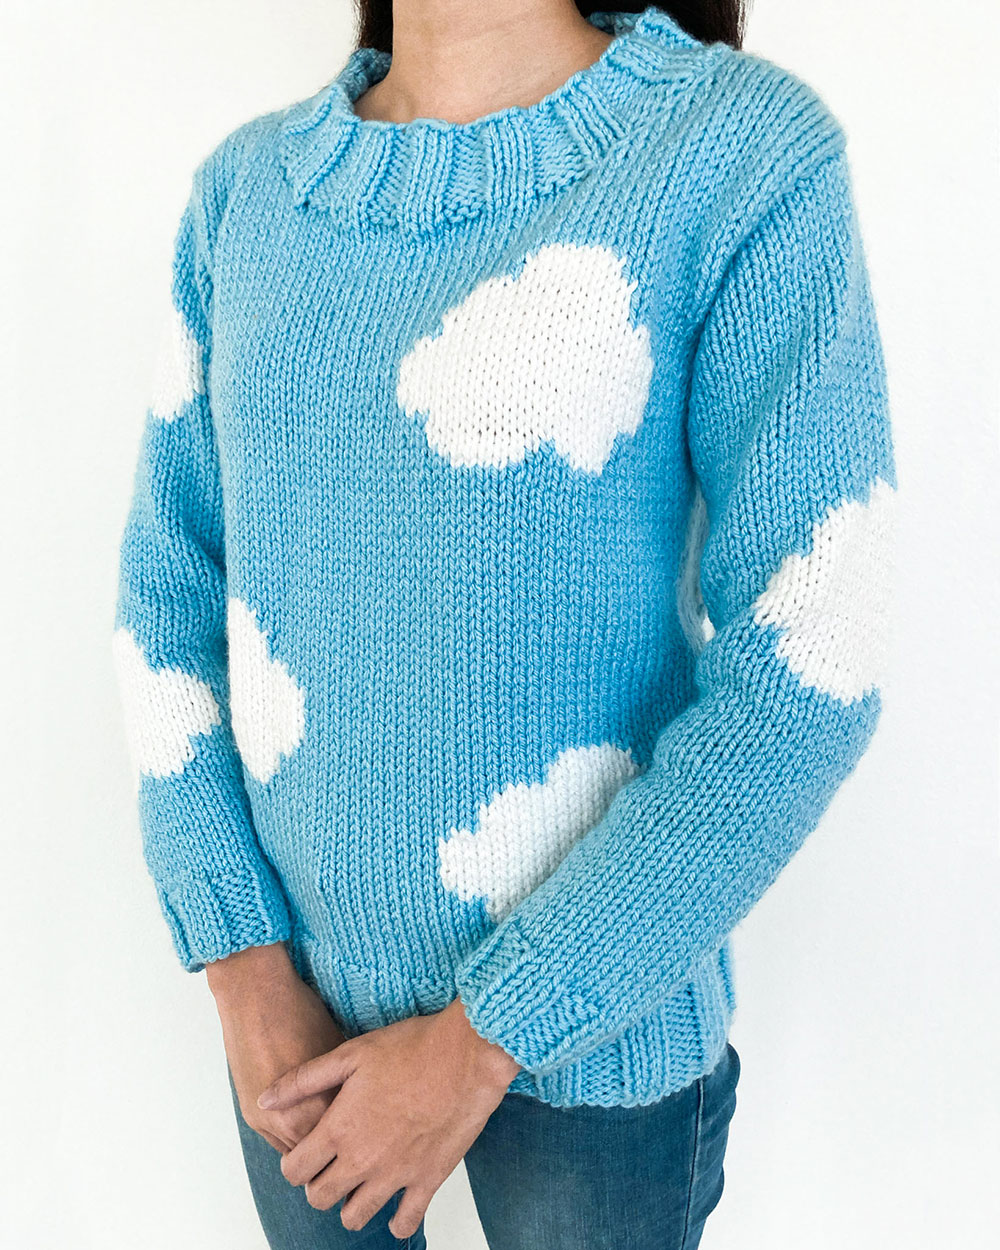 Unisex Knitted Cloud Sweater - Inspire Uplift